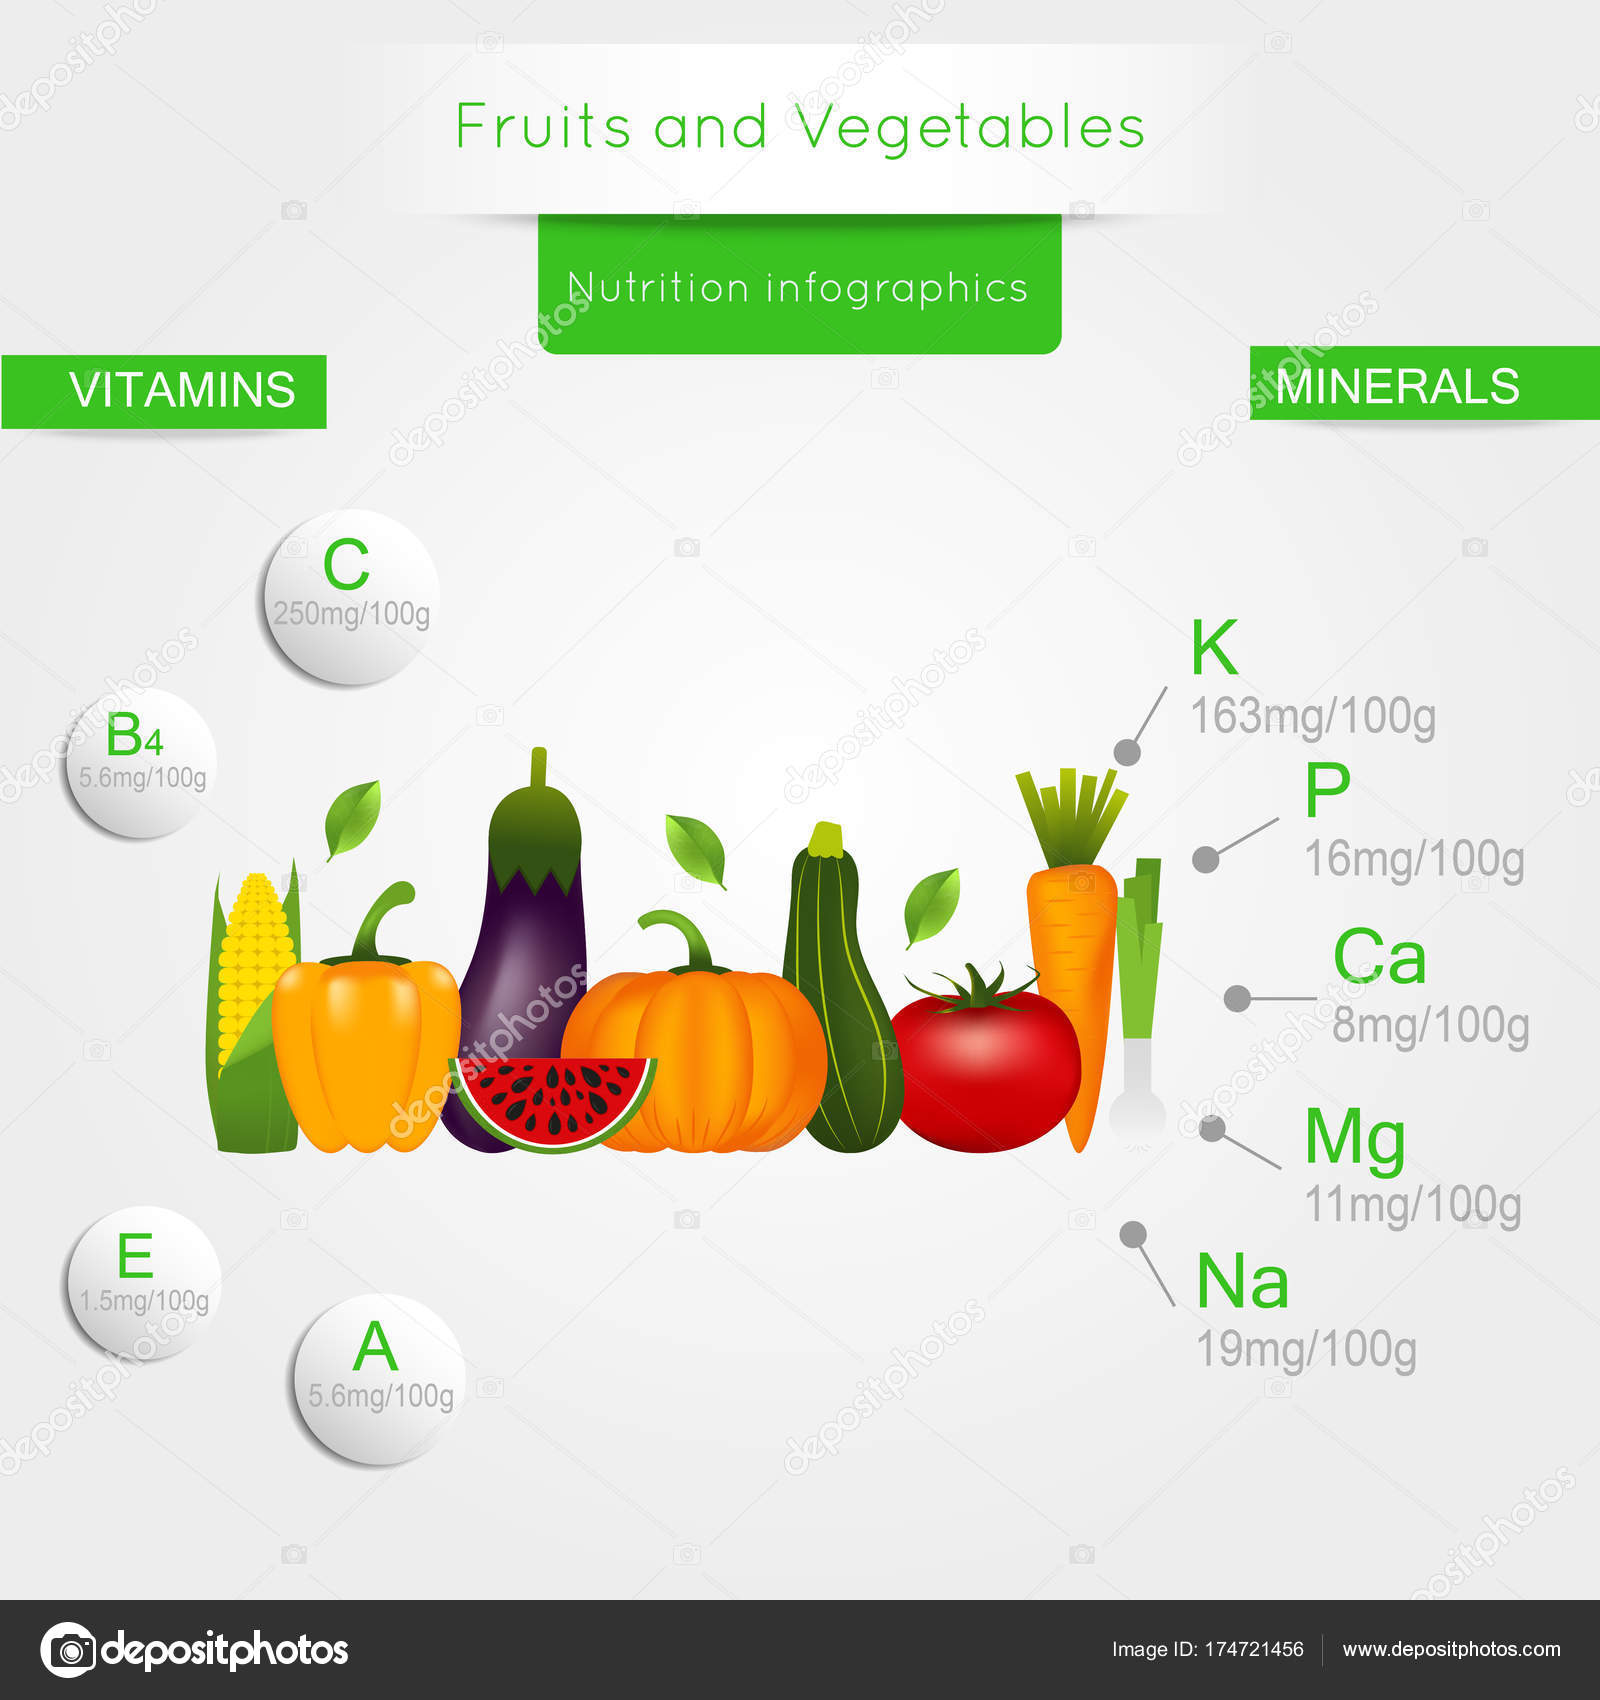 Fruits And Vegetables And Their Benefits Chart